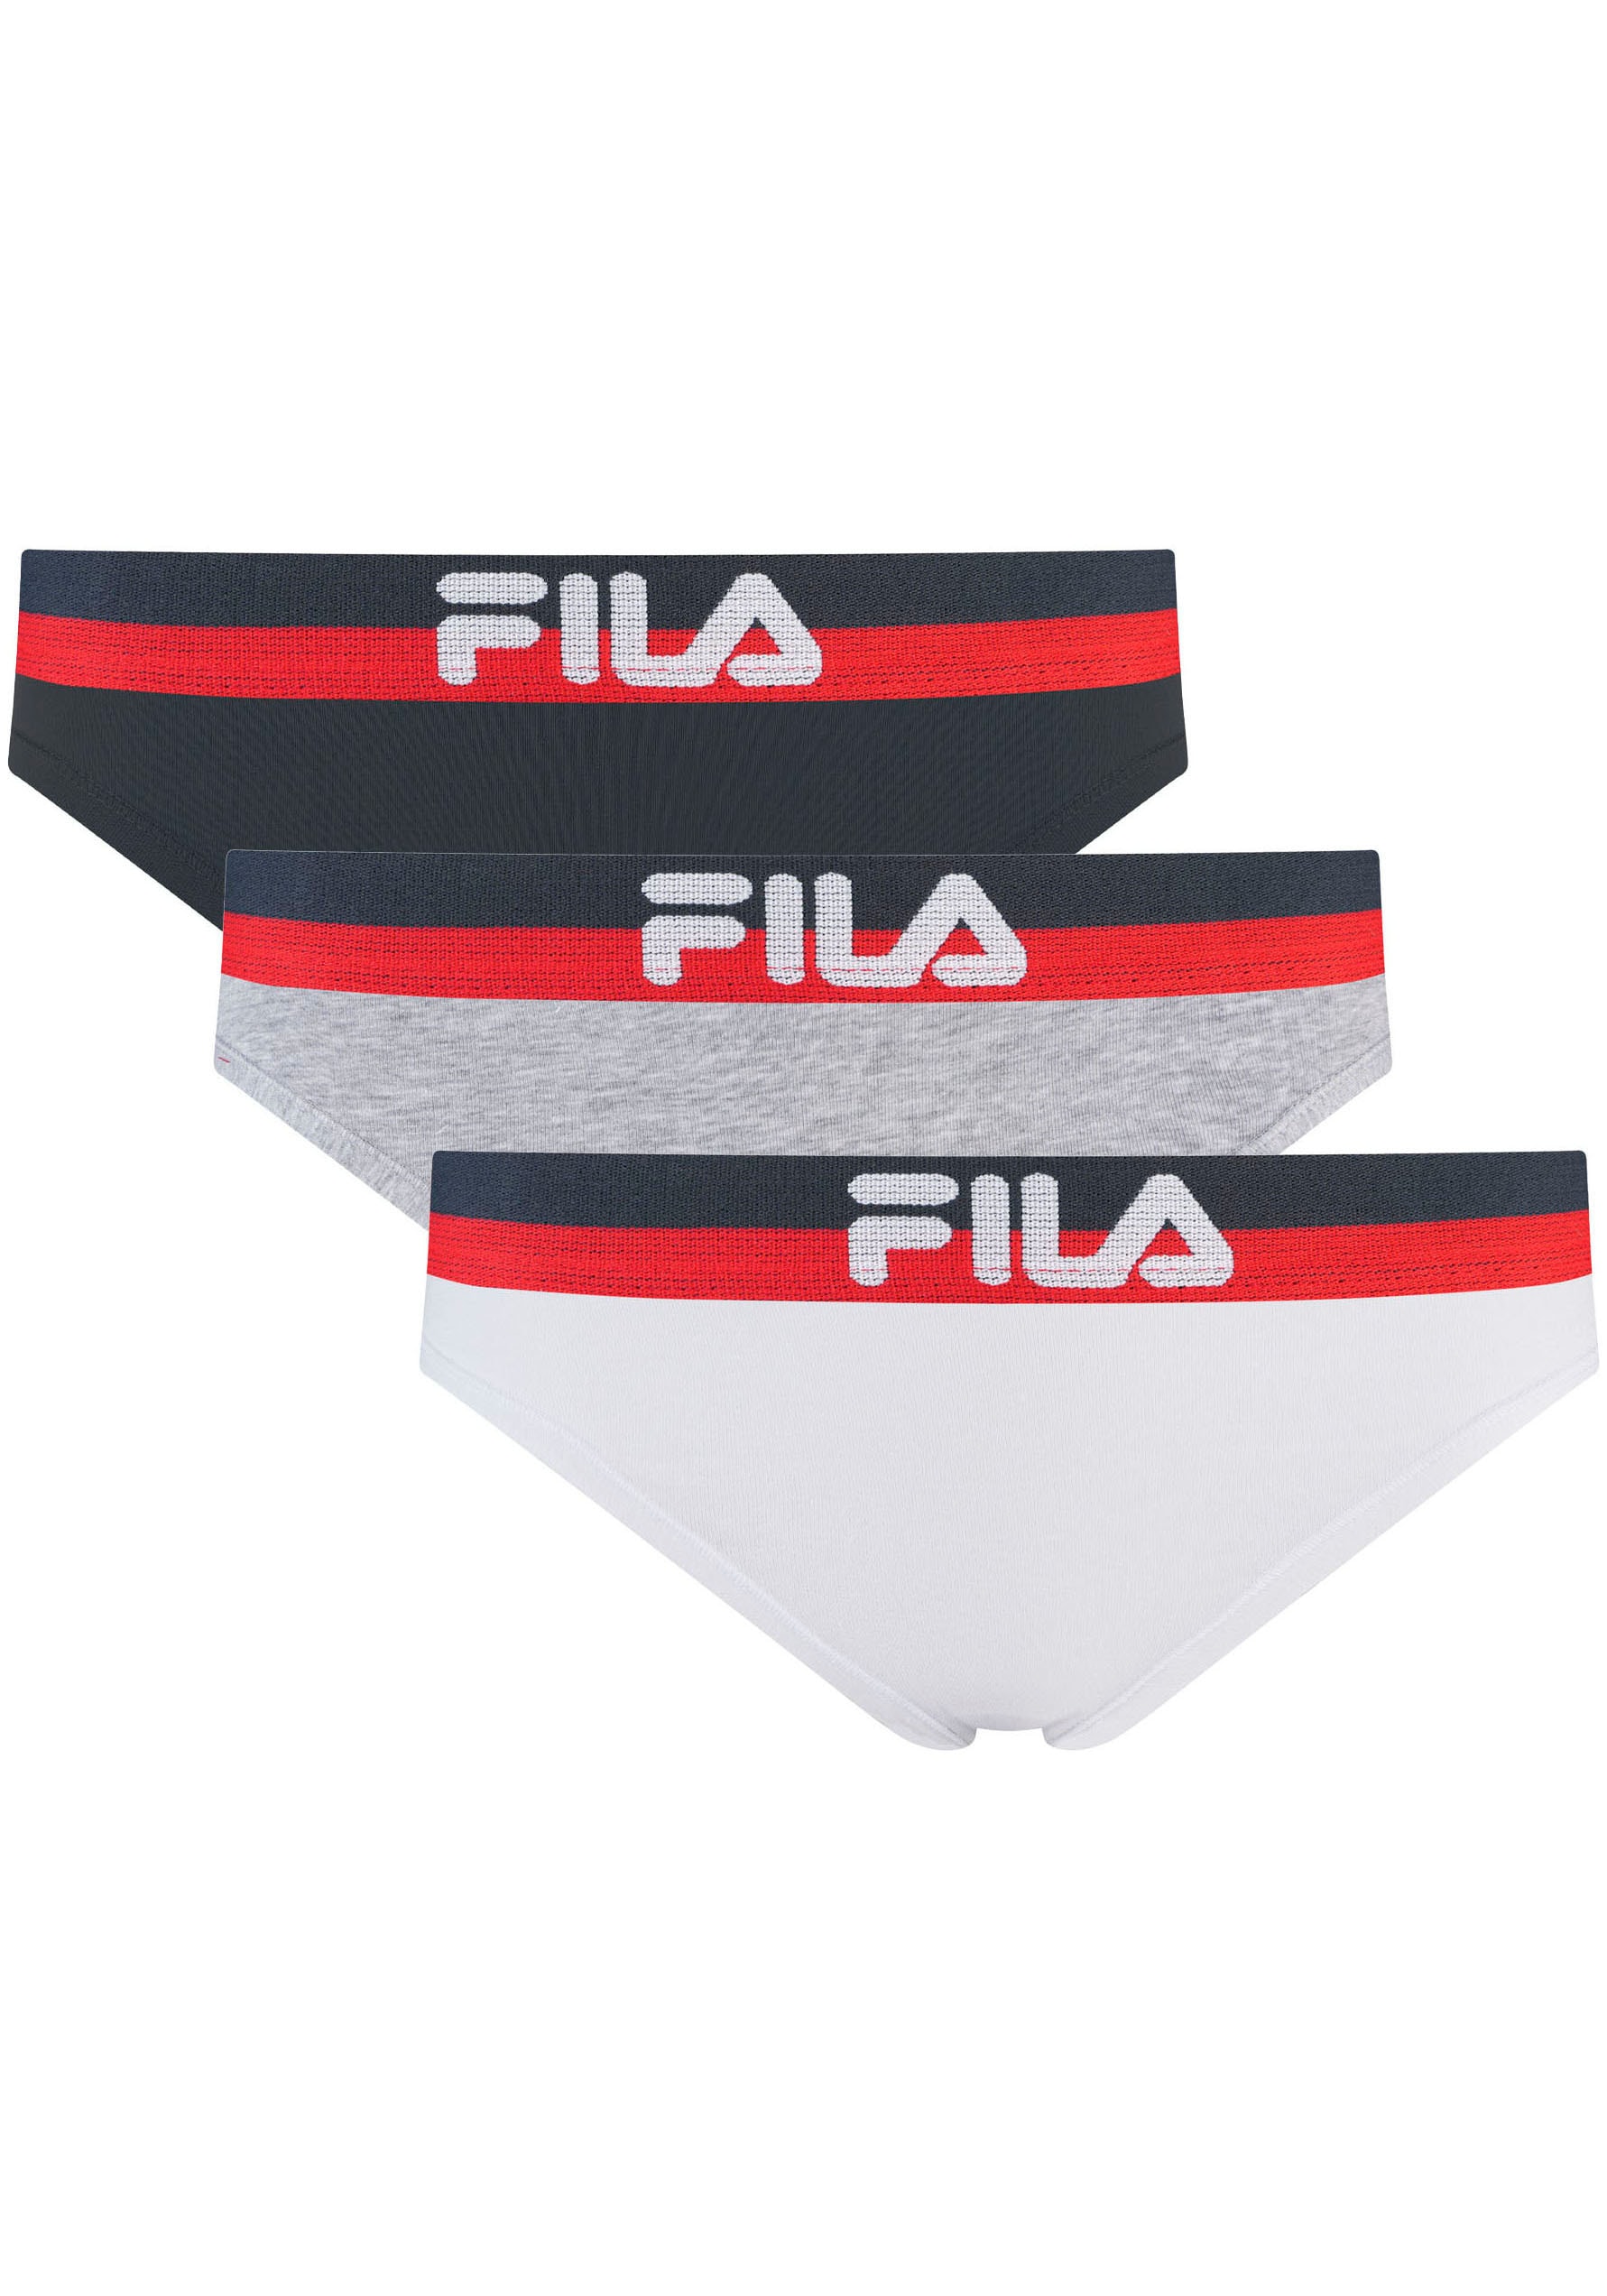 Fila String, (Packung, 3 St.)